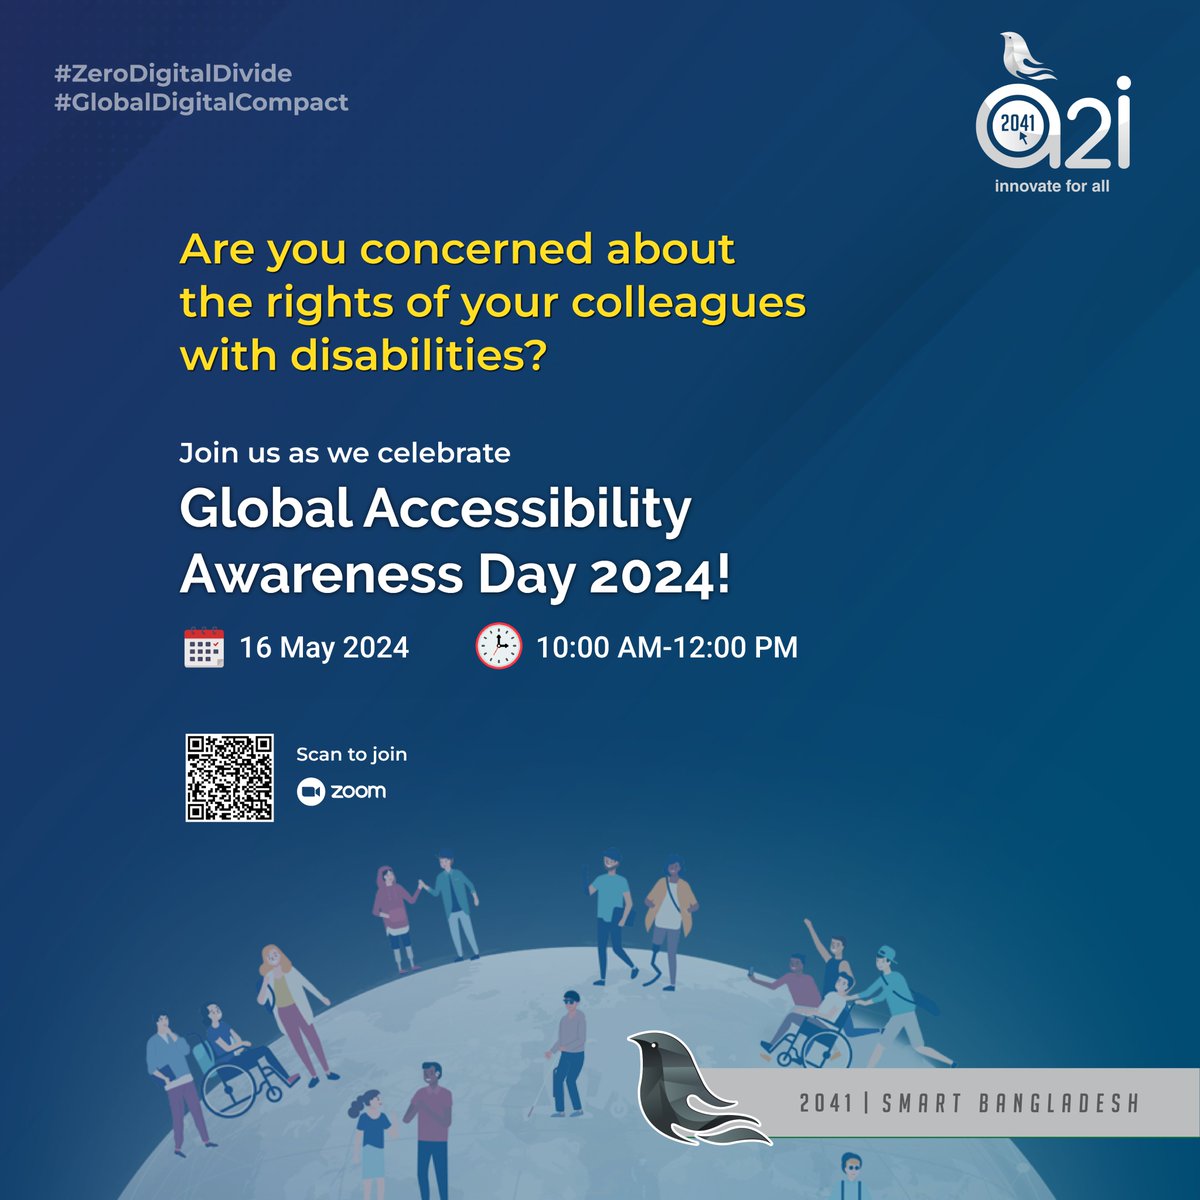 As part of the #ZeroDigitalDivide, we are going to celebrate Global Accessibility Awareness Day (GAAD) 2024. Join us in celebrating this day... 🔗𝐙𝐨𝐨𝐦: zoom.us/j/8163204435?p… #SmartBangladesh2041 #Accessibility #LeaveNoOneBehind #InclusionMatters #GlobalDigitalCompact